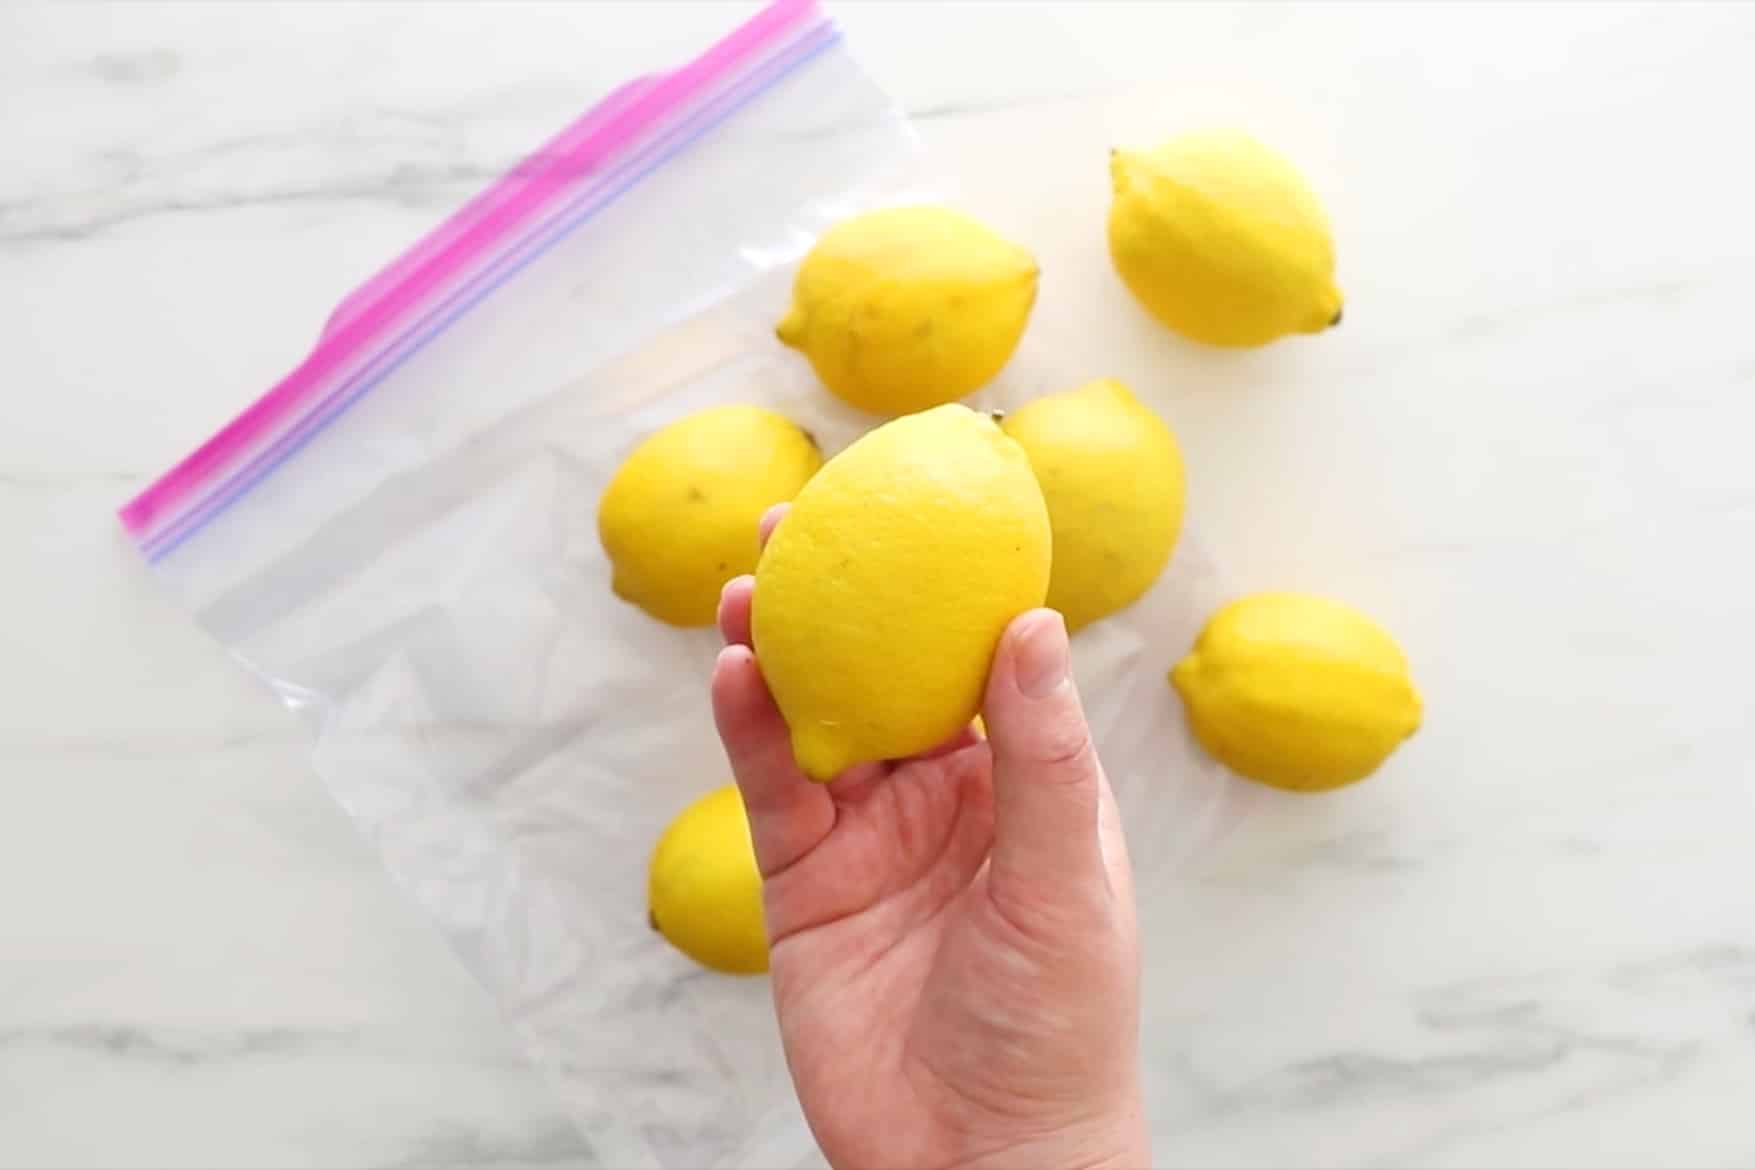 frugal kitchen tips: how to store lemons so they last longer